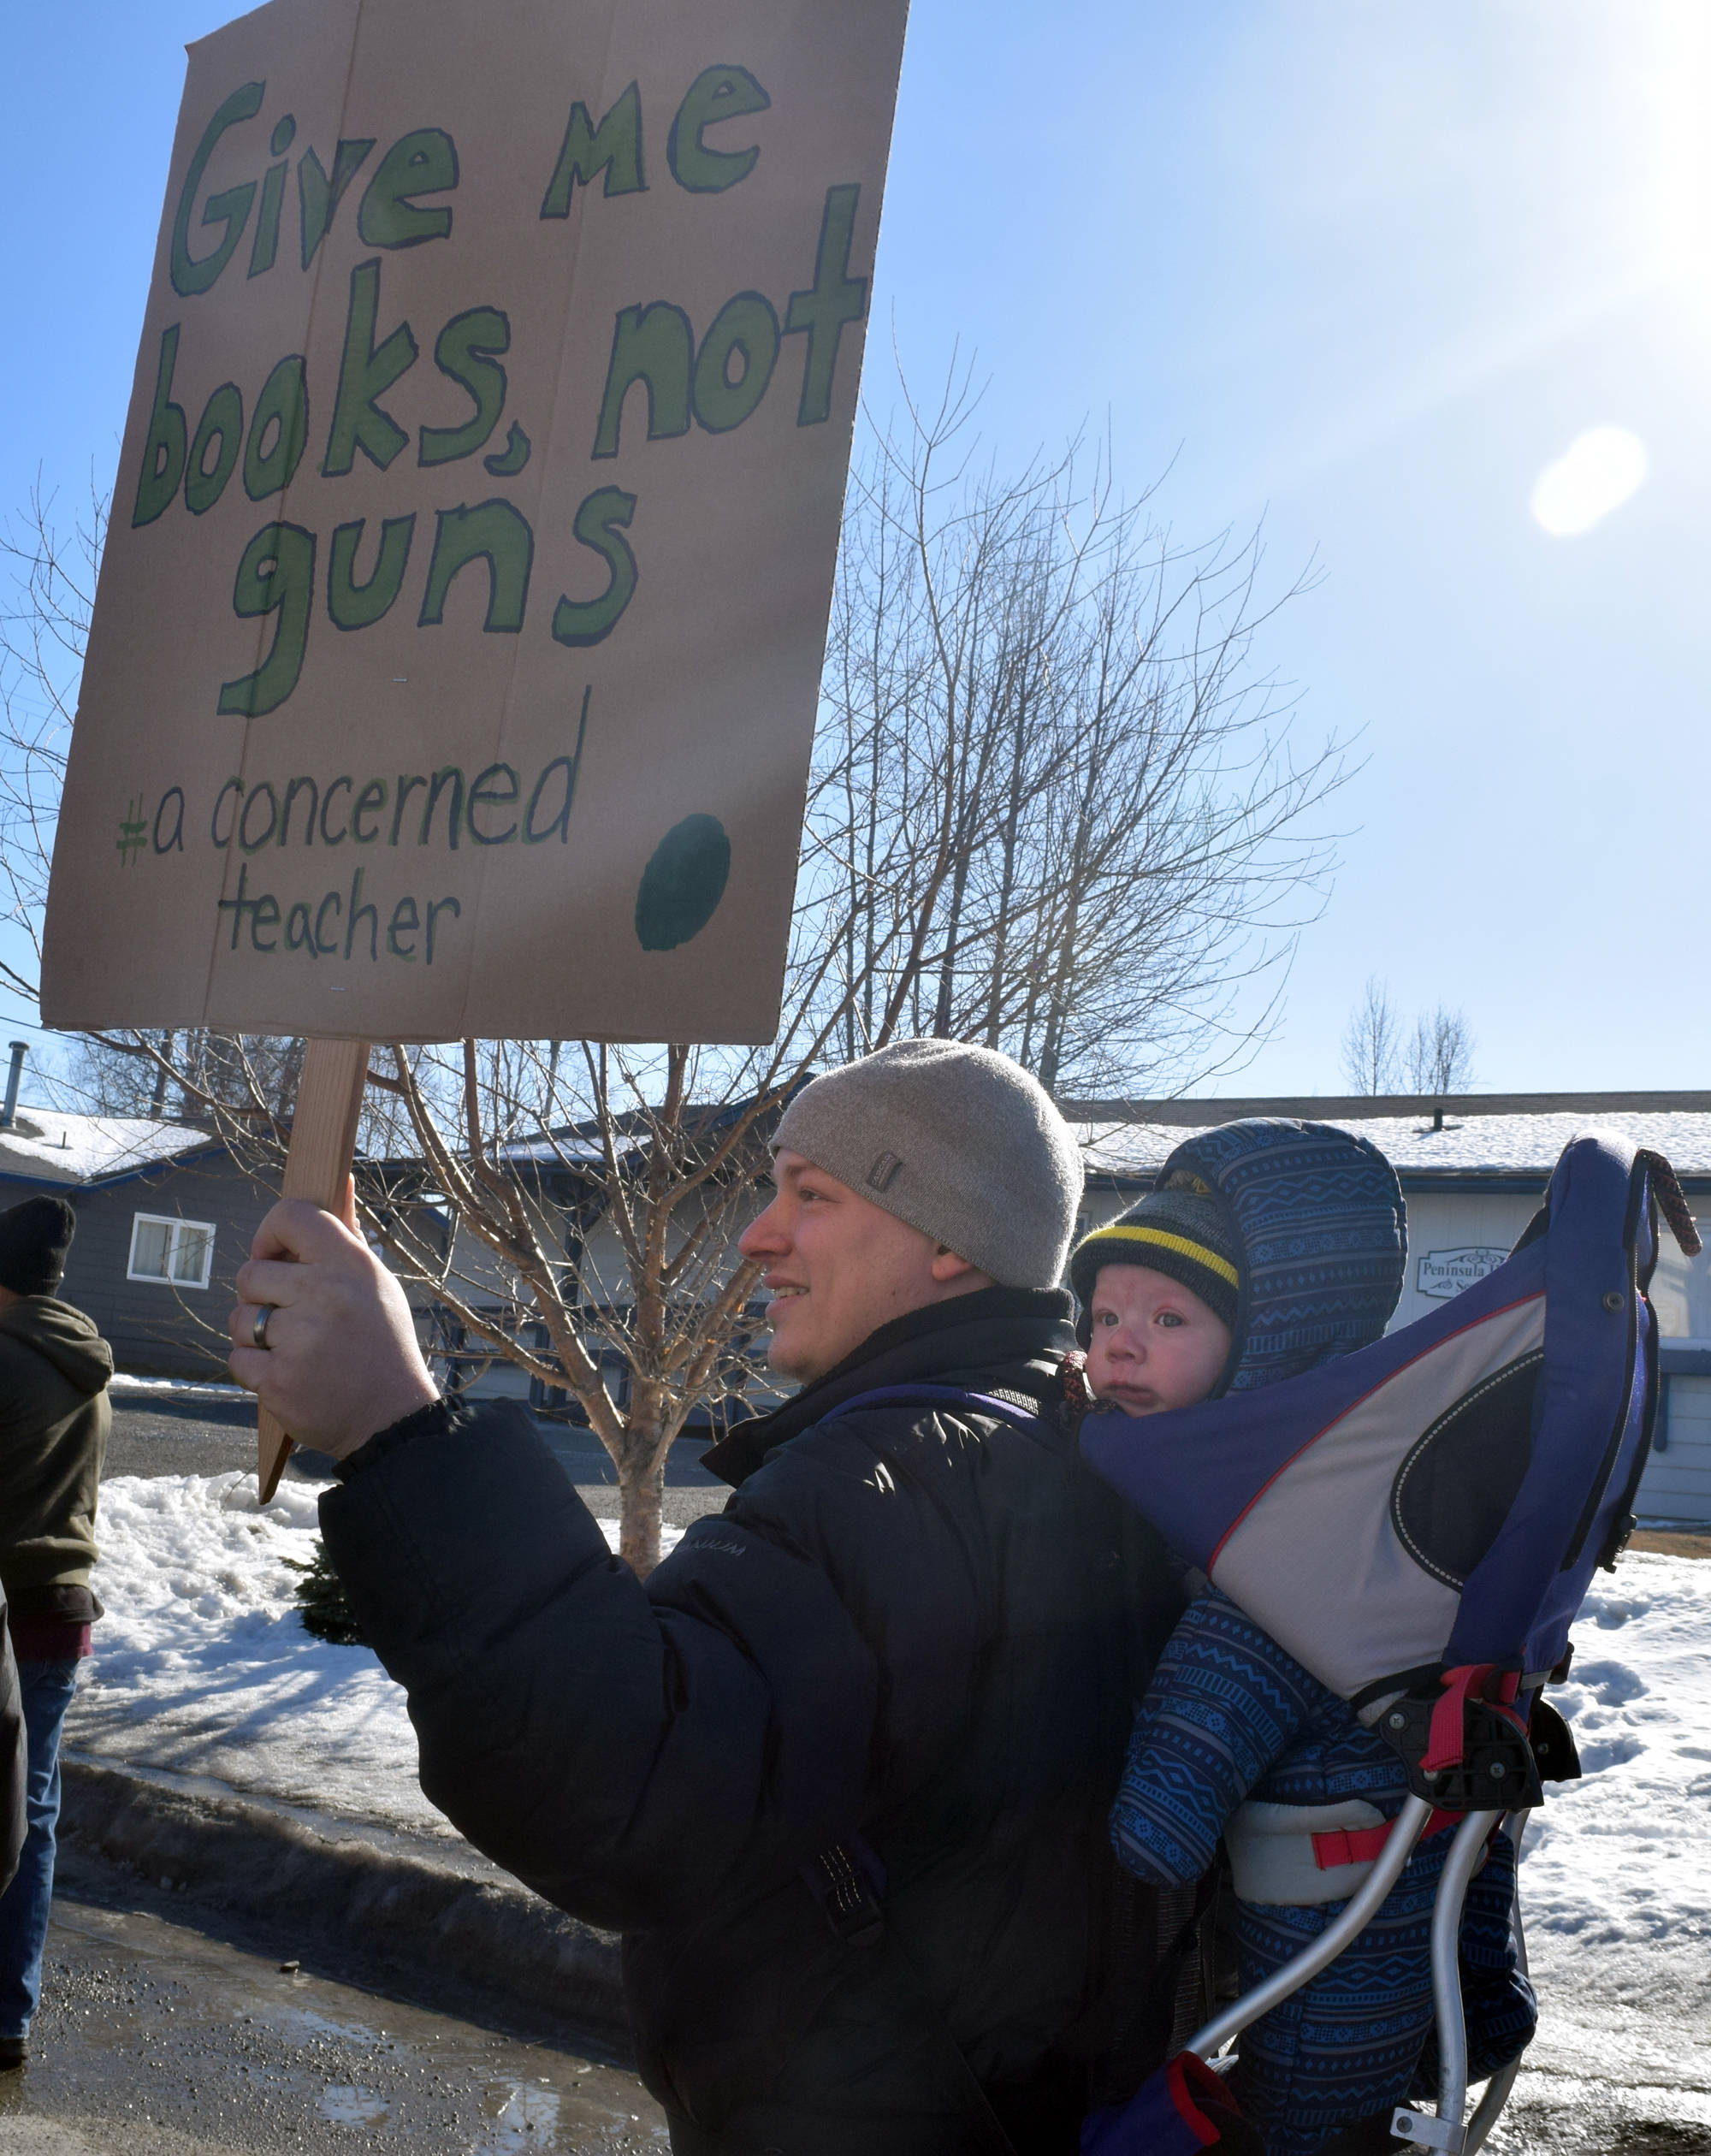 Daniel Bowen walks along North Binkley Street with his son Zachary on his back to the Kenai Peninsula Borough building in Soldotna on Saturday as part of the national March for Our Lives rally, which took place in cities and towns across the country in support of gun control laws. (Photo by Kat Sorensen/Peninsula Clarion)